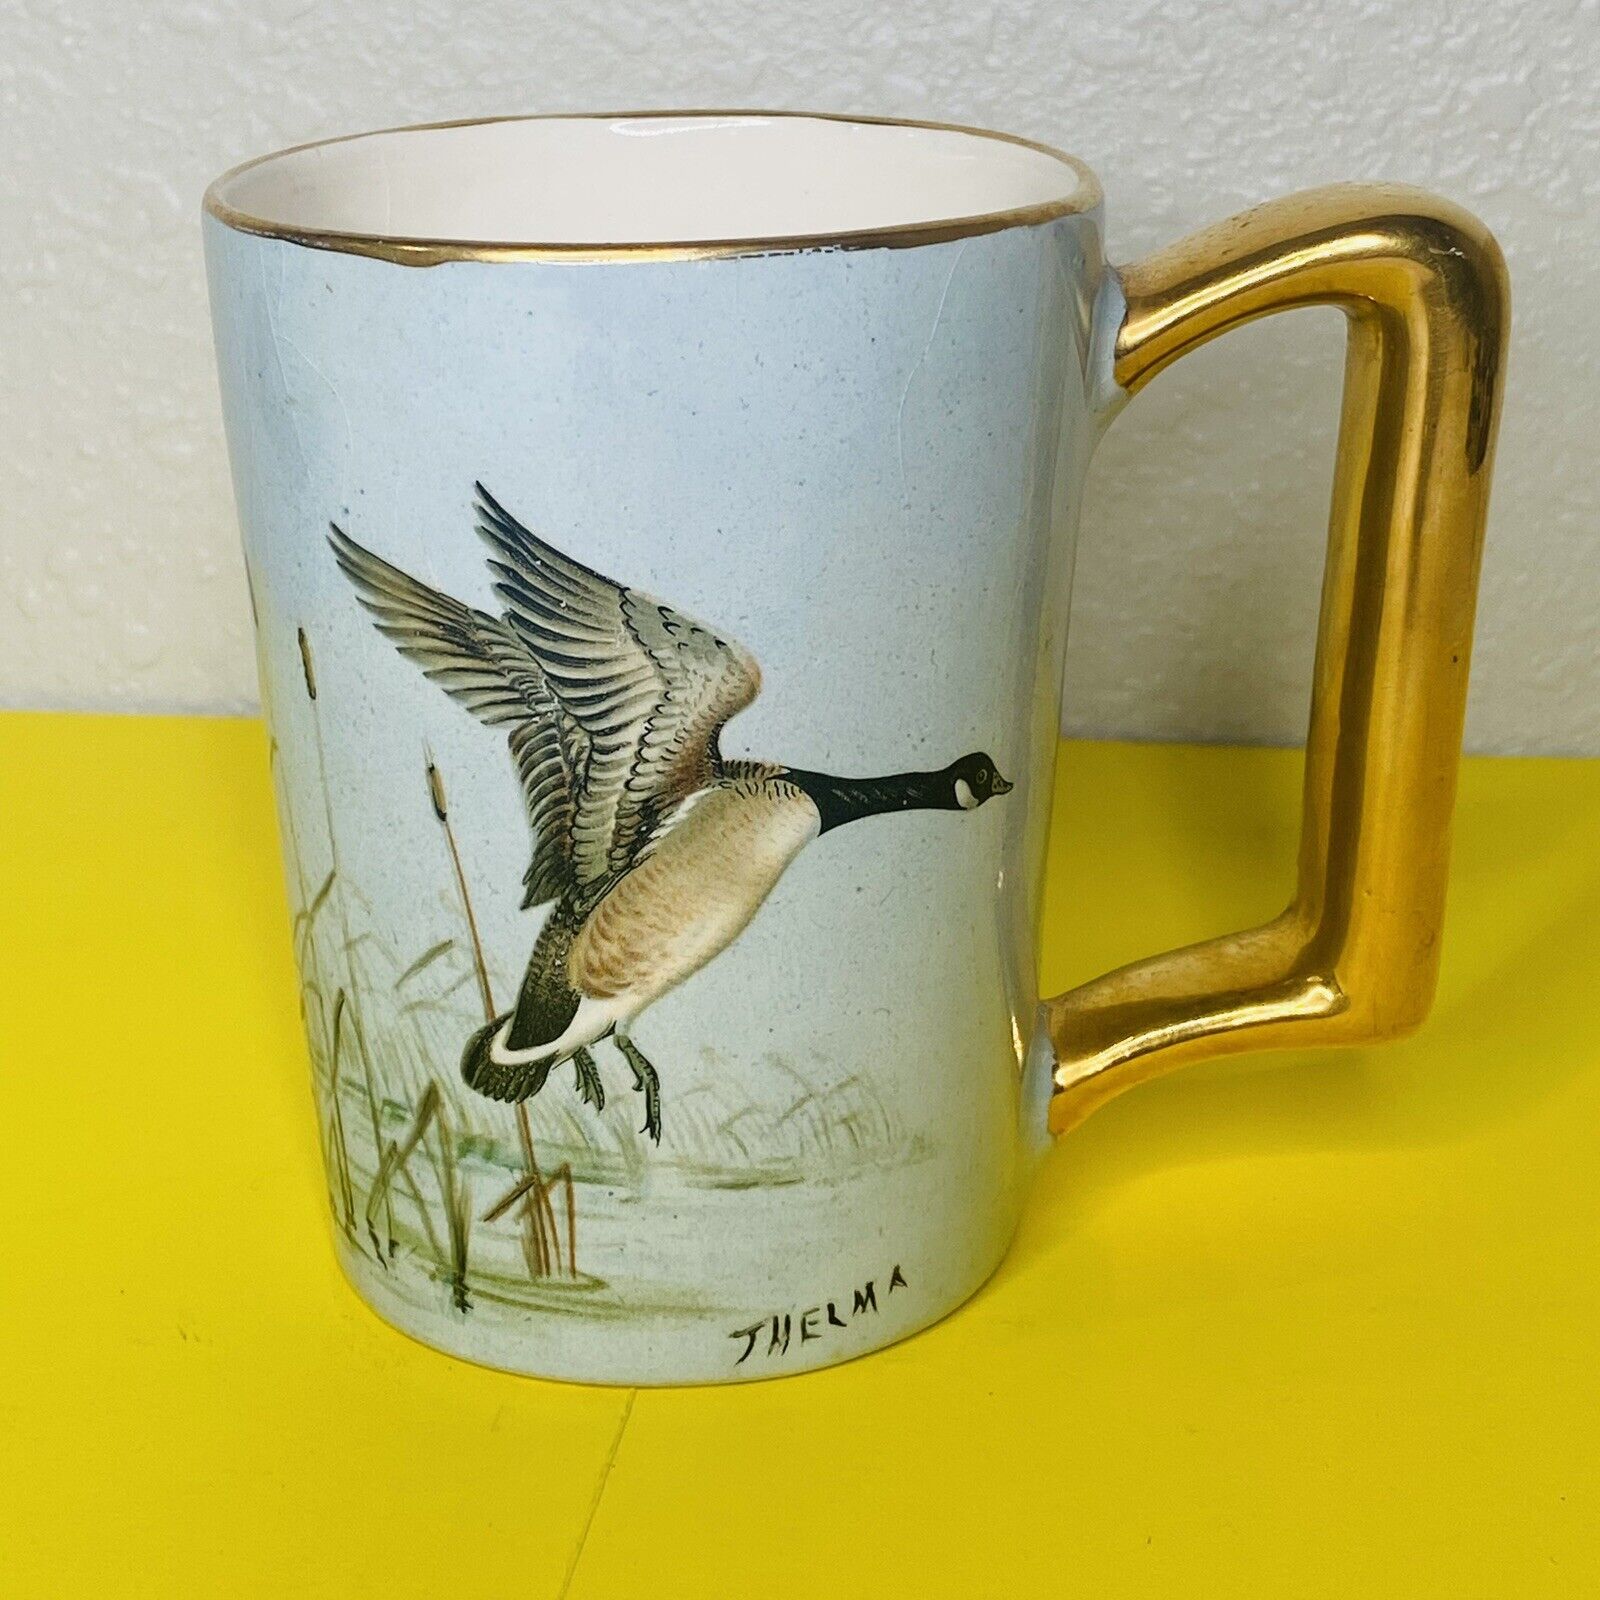 Thelma 1964 Vtg Mug Fielding Our Leader Geese Blue Gold